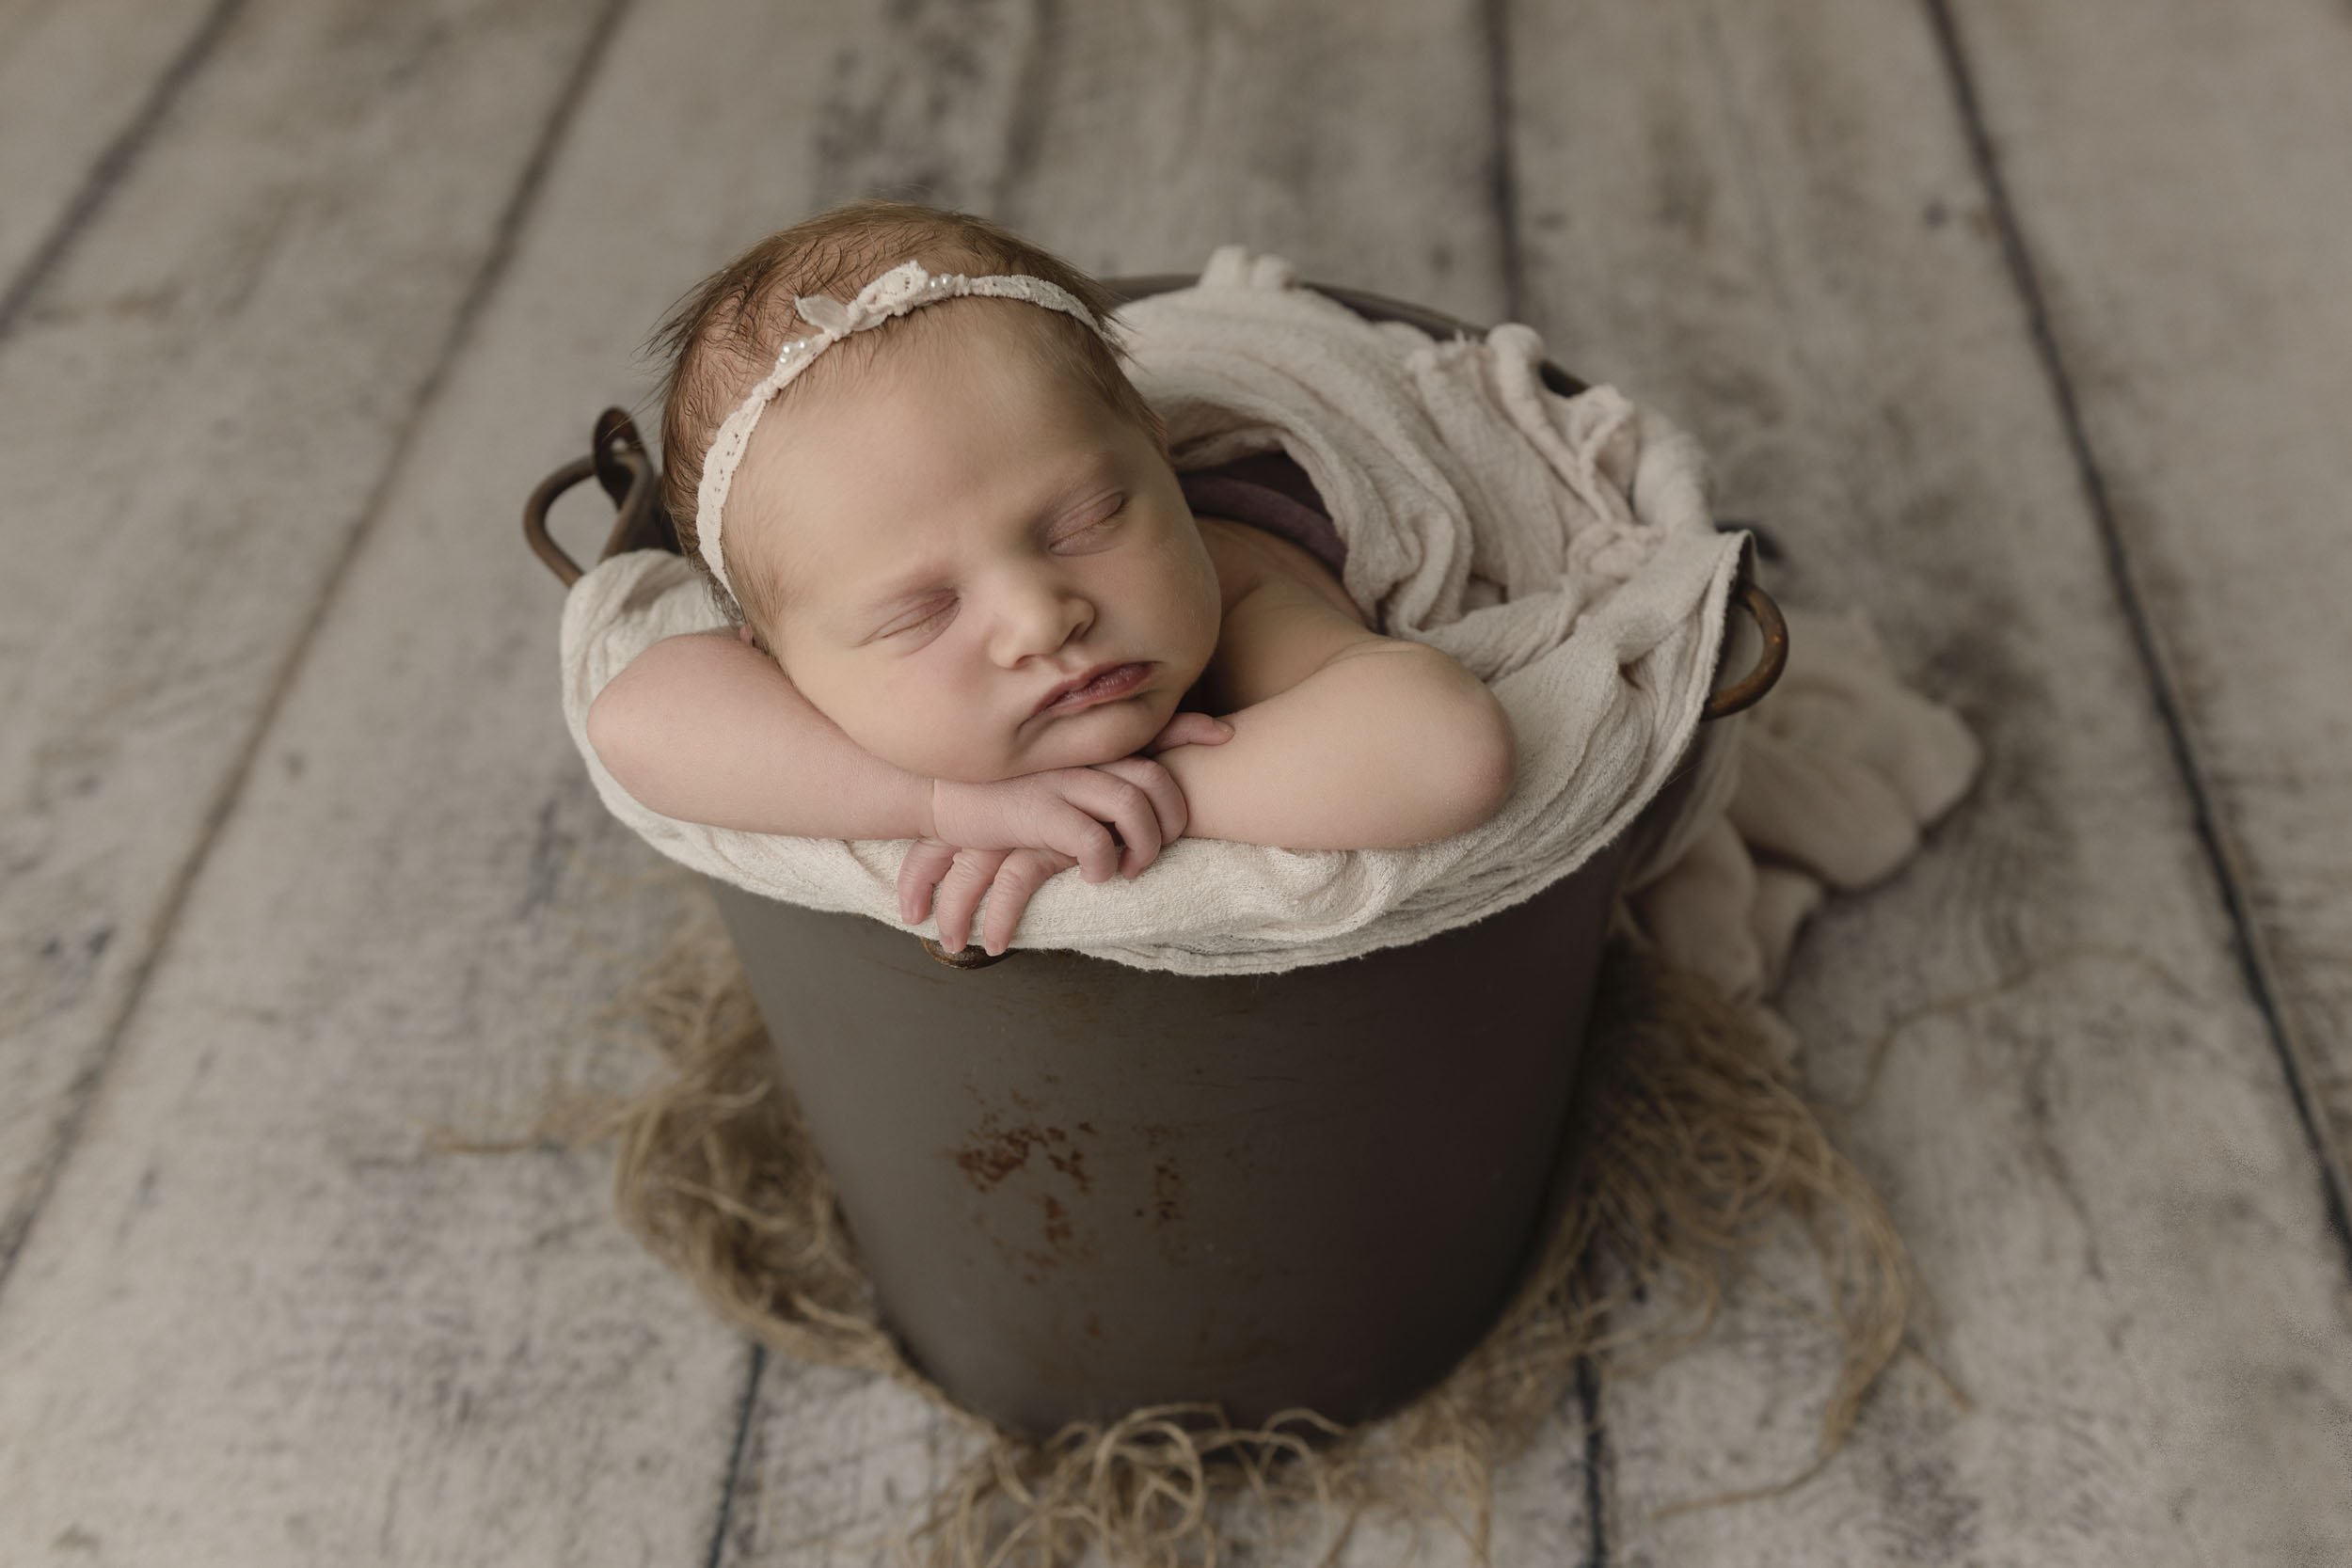 Airdrie Newborn Photographer Lace and Locket Photo-10.jpg